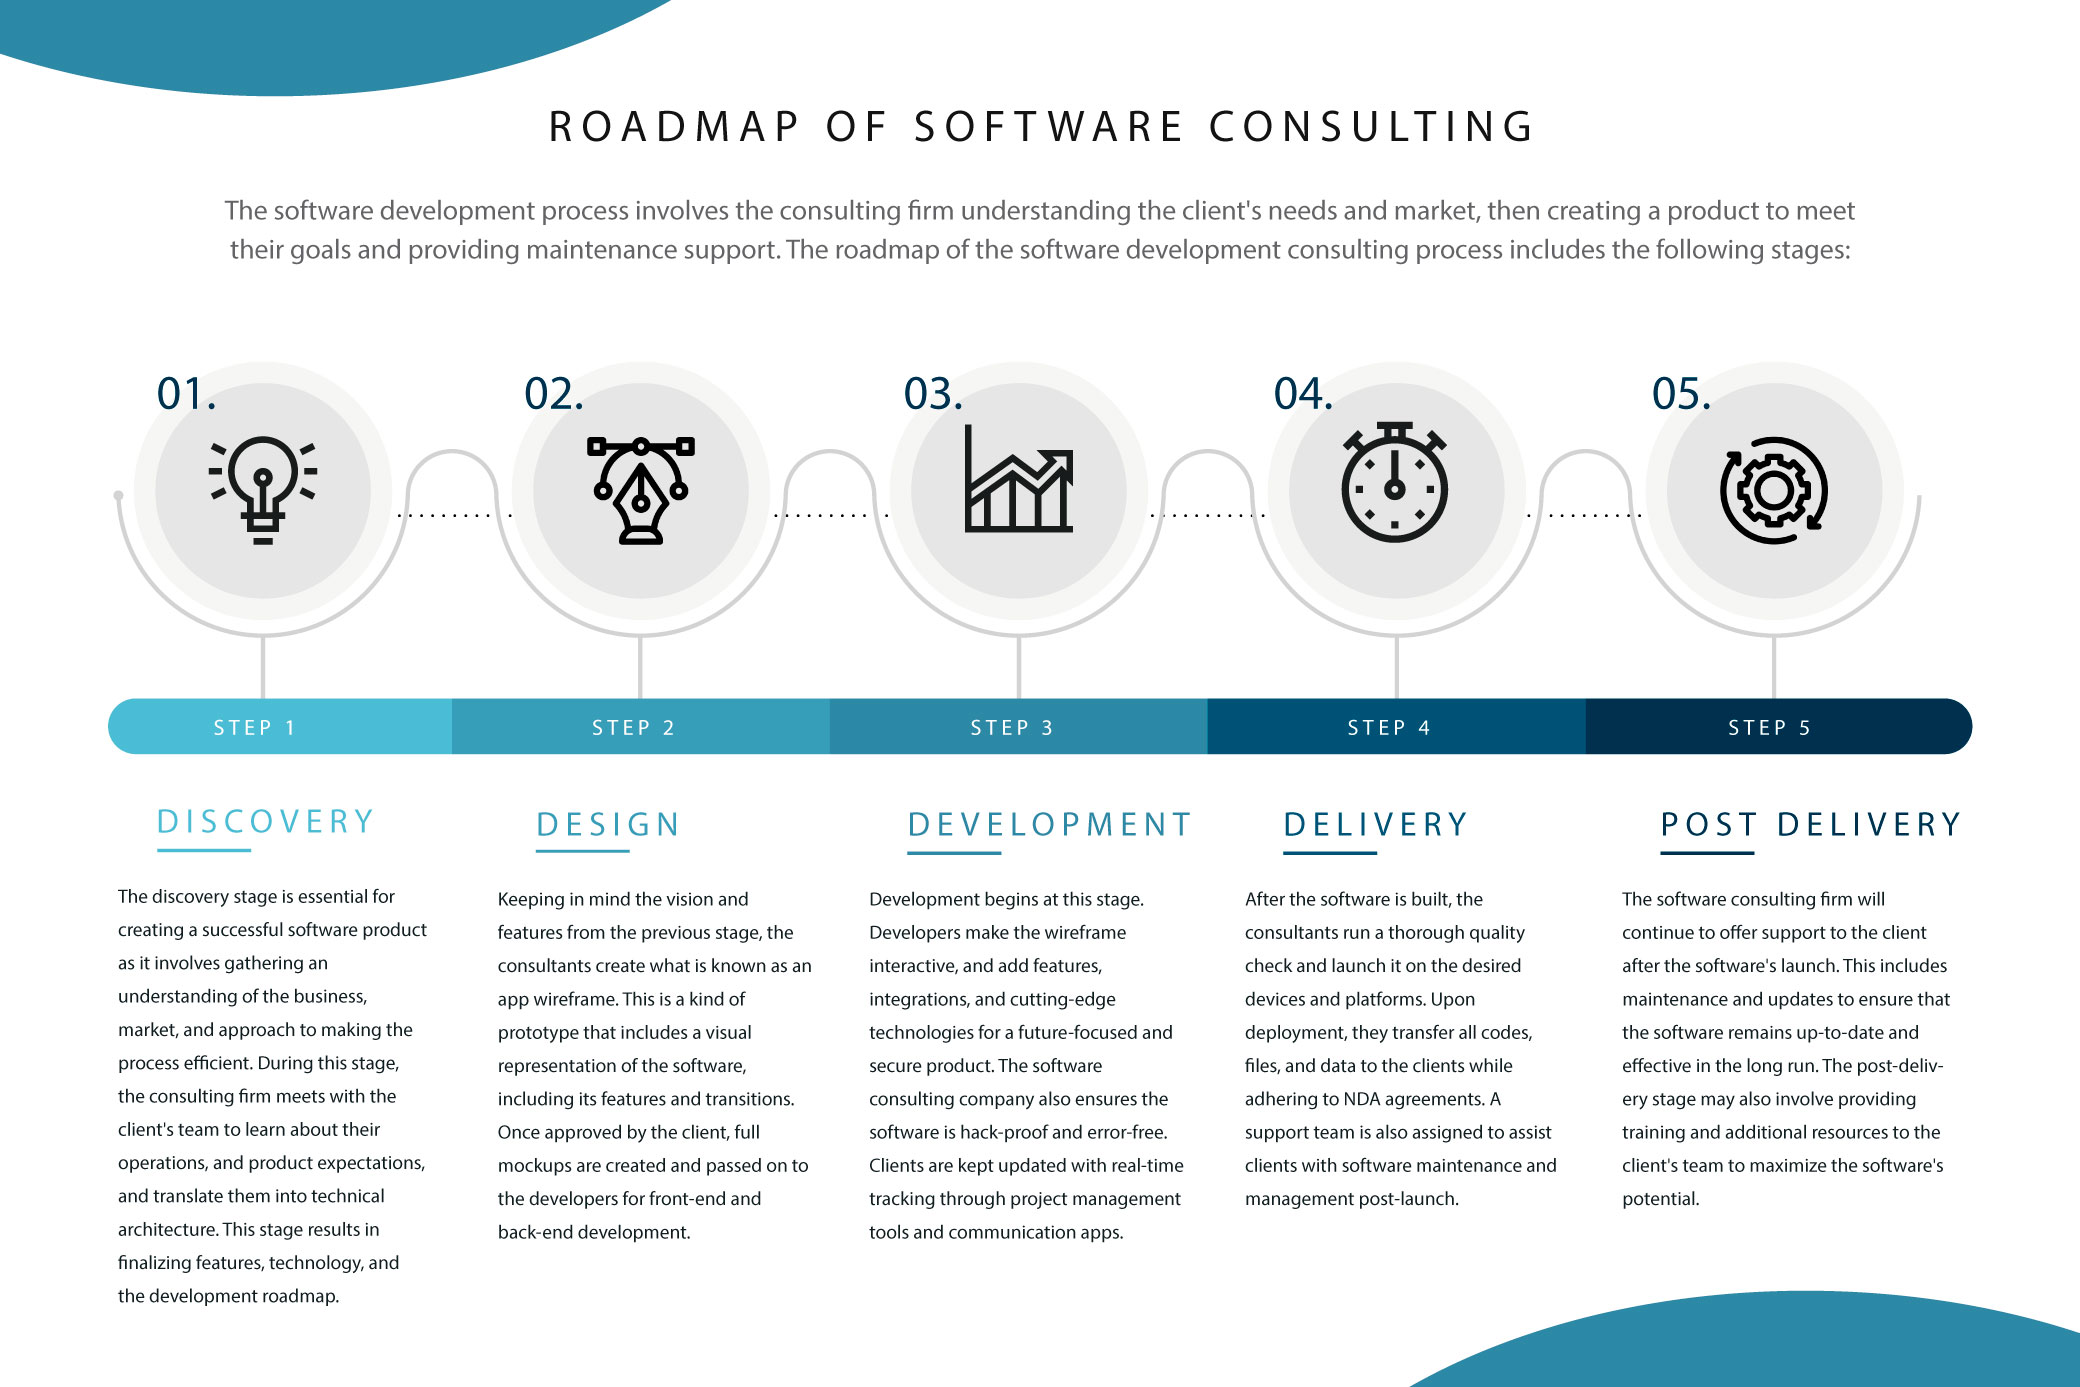 Roadmap of Software Consulting